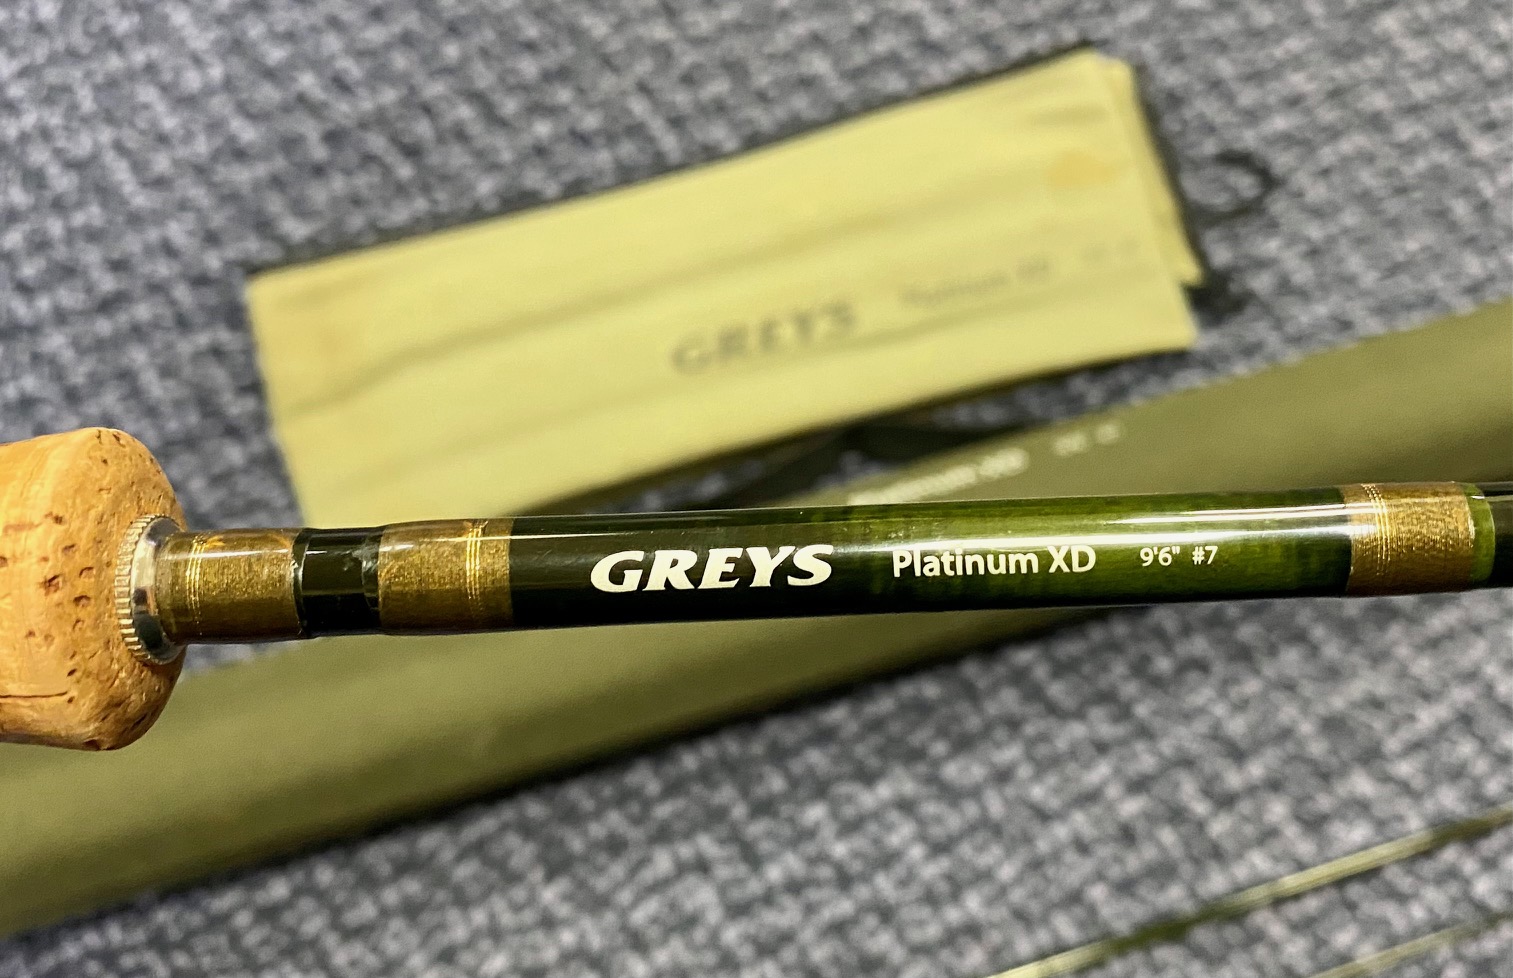 Hardy Fibalite blank 10ft #7/8 2 Piece fly rod (in bag) - Used